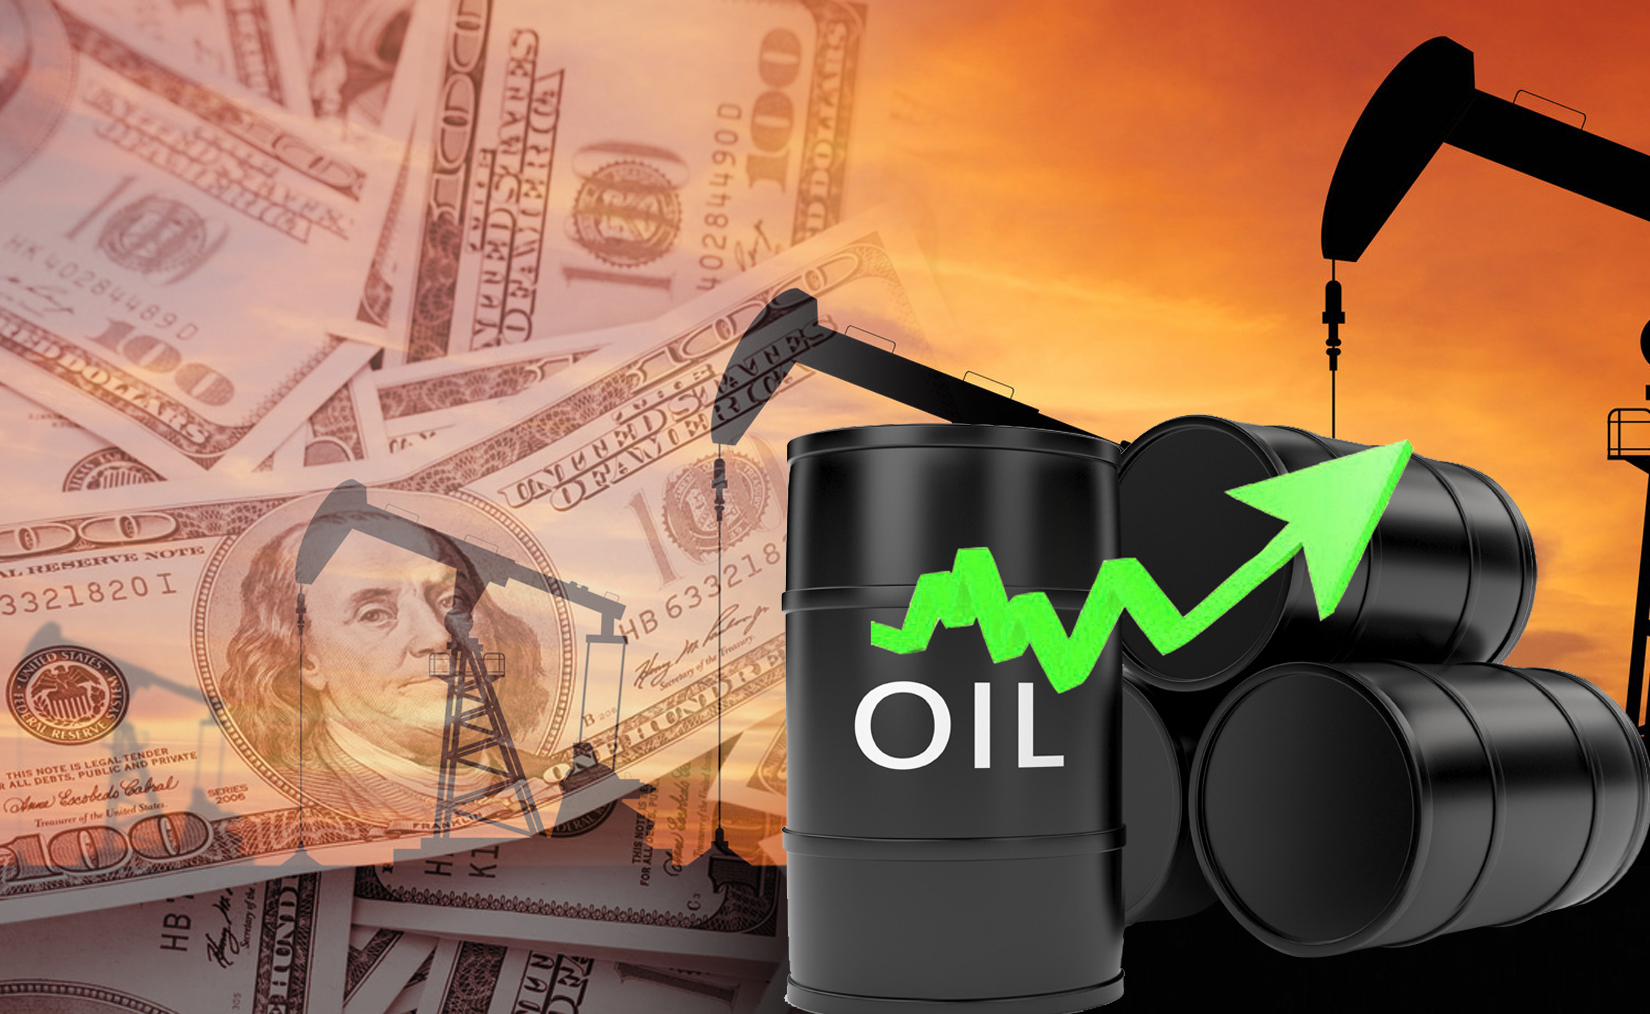 Kuwait oil price up 38 cents to USD 43.64